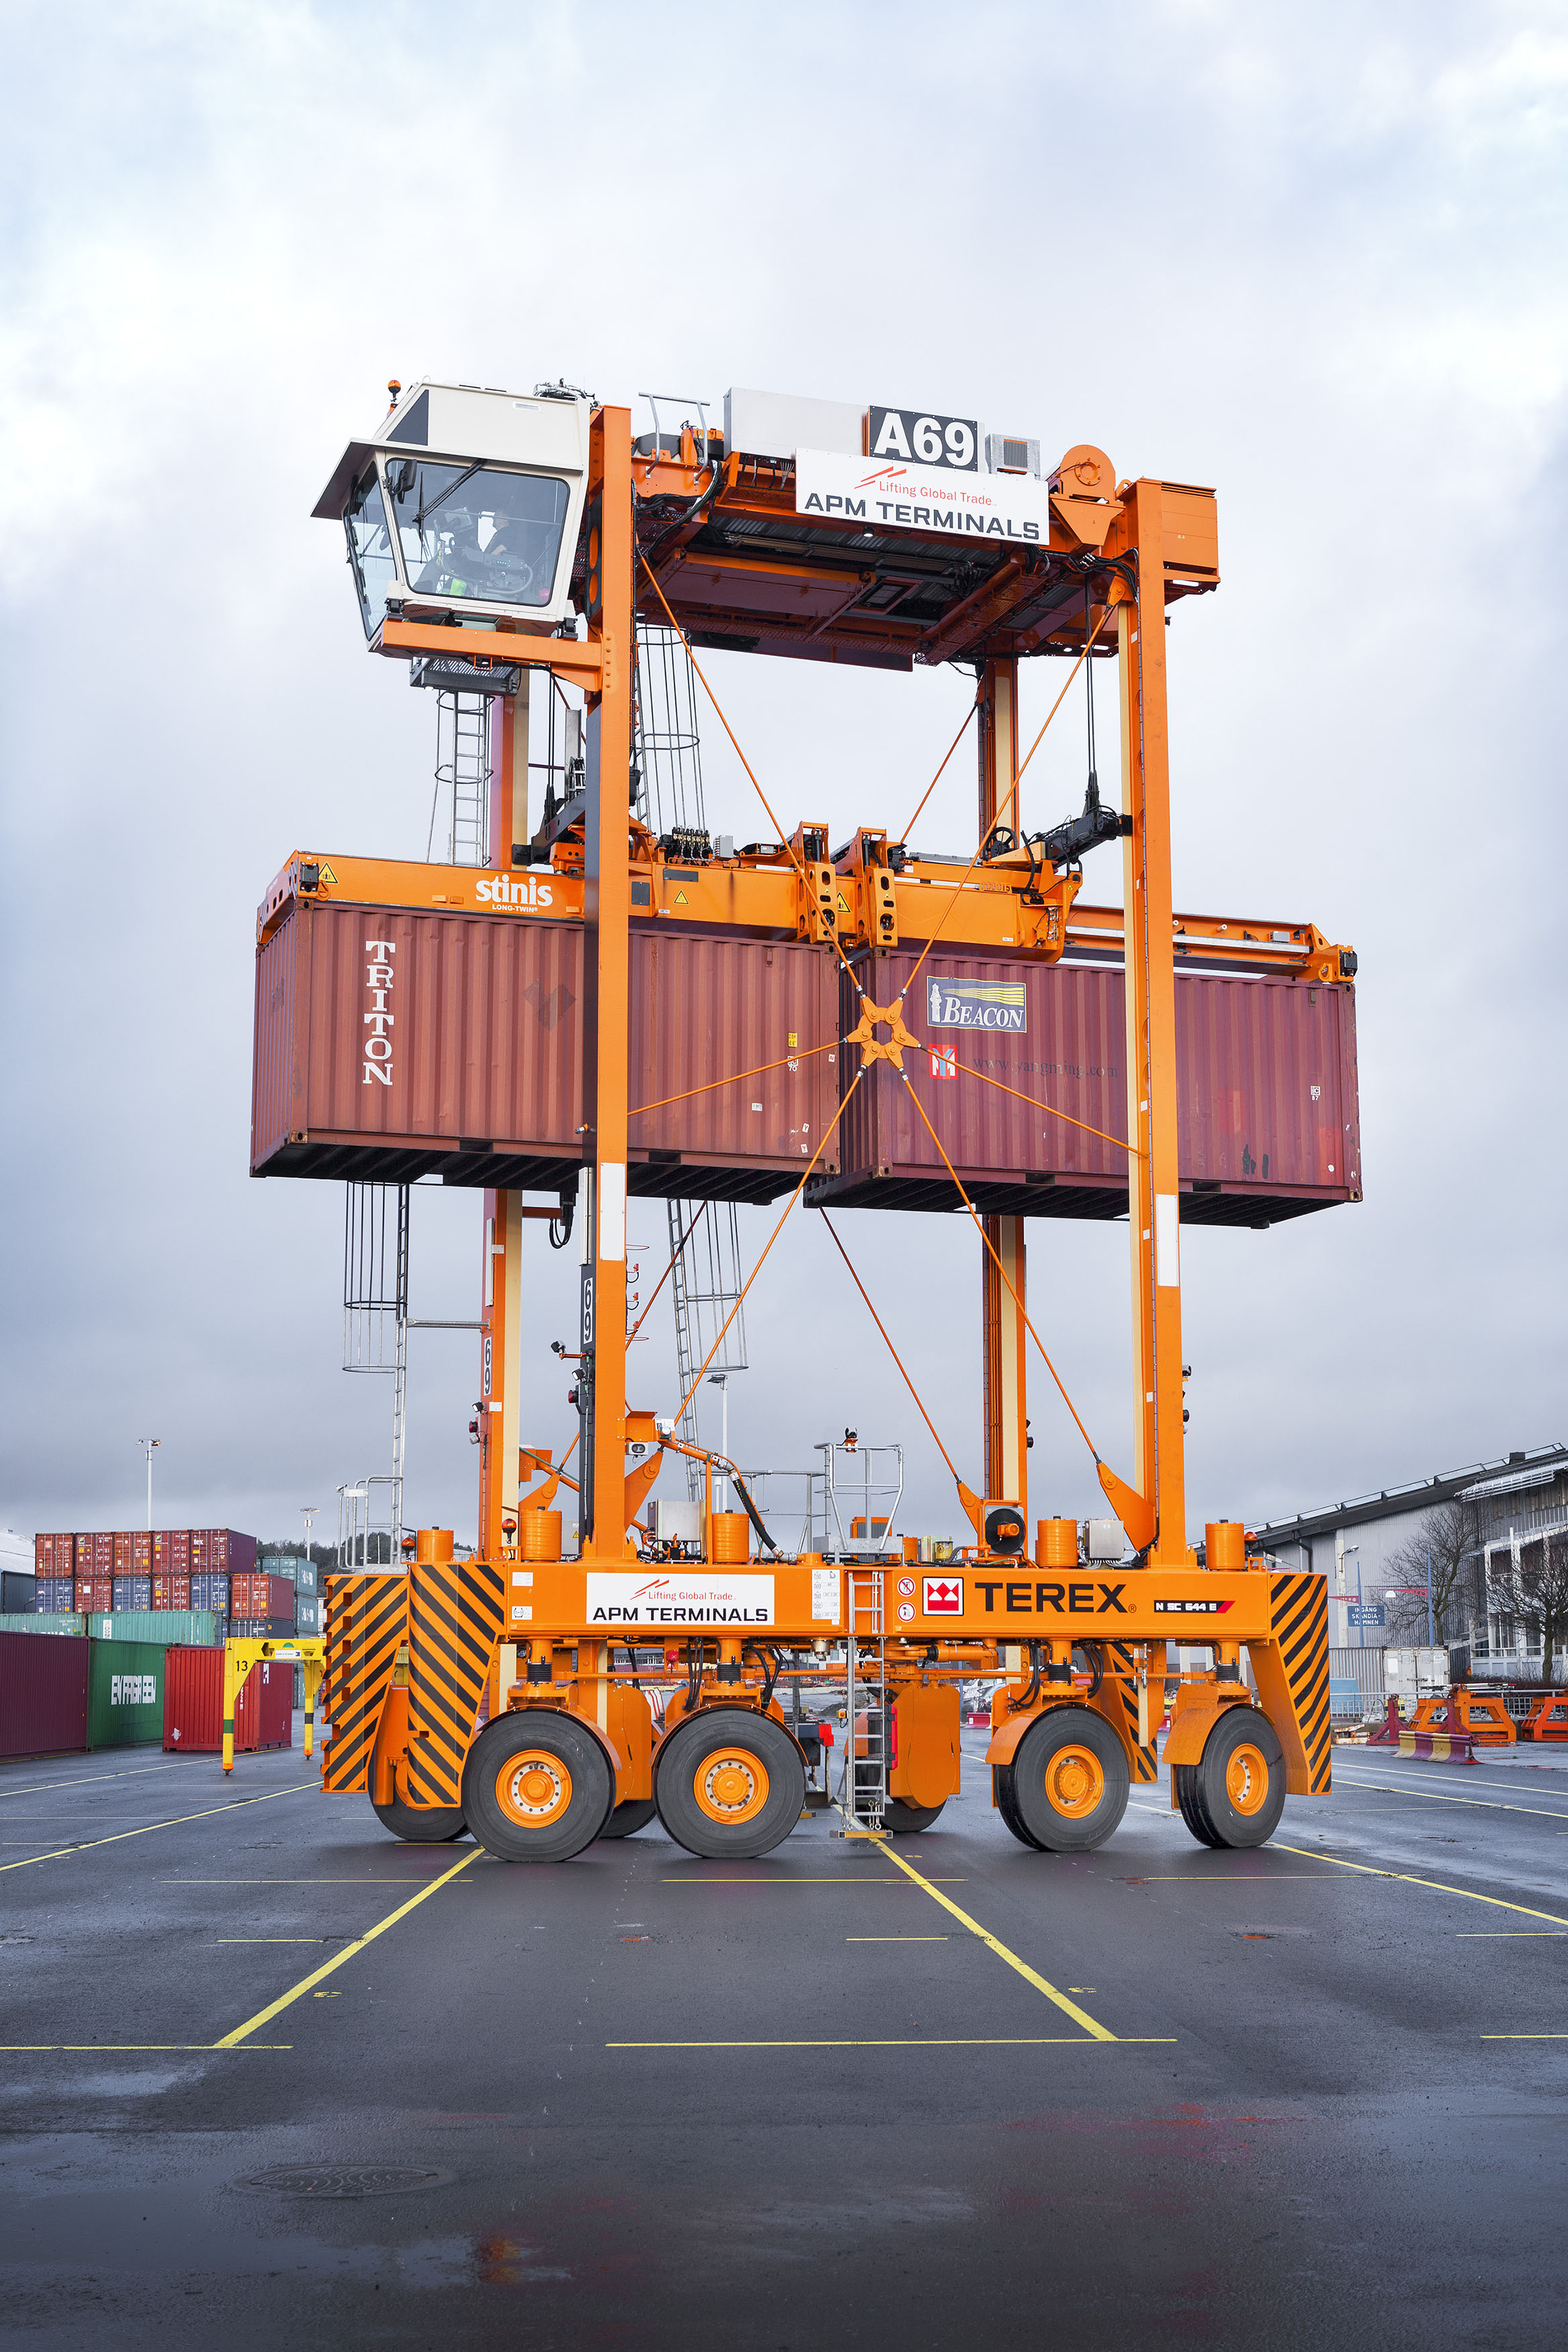 New Straddle Carriers Boost Gothenburg Capacity | Yellow ...